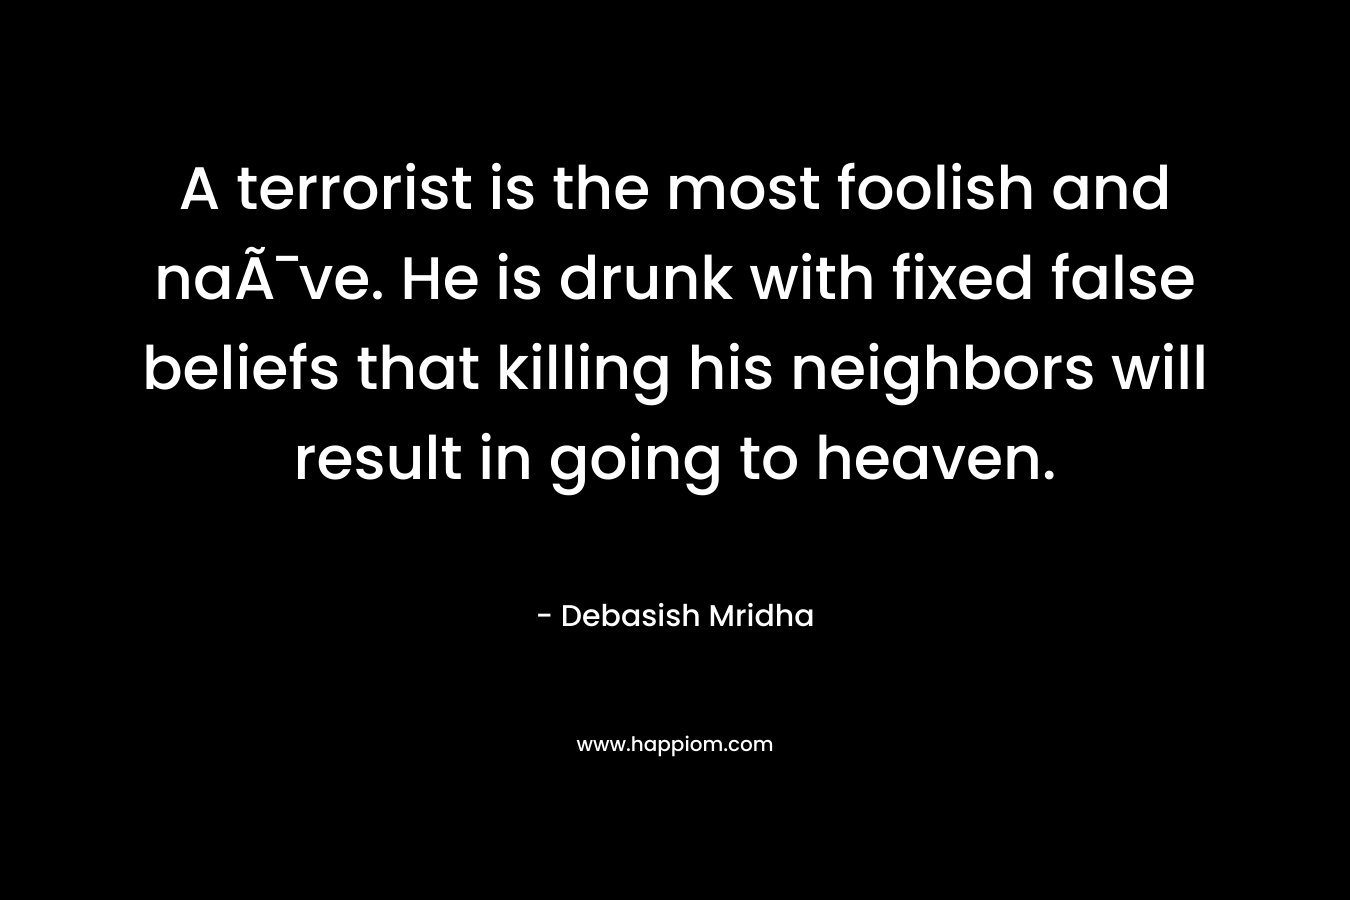 A terrorist is the most foolish and naÃ¯ve. He is drunk with fixed false beliefs that killing his neighbors will result in going to heaven. – Debasish Mridha